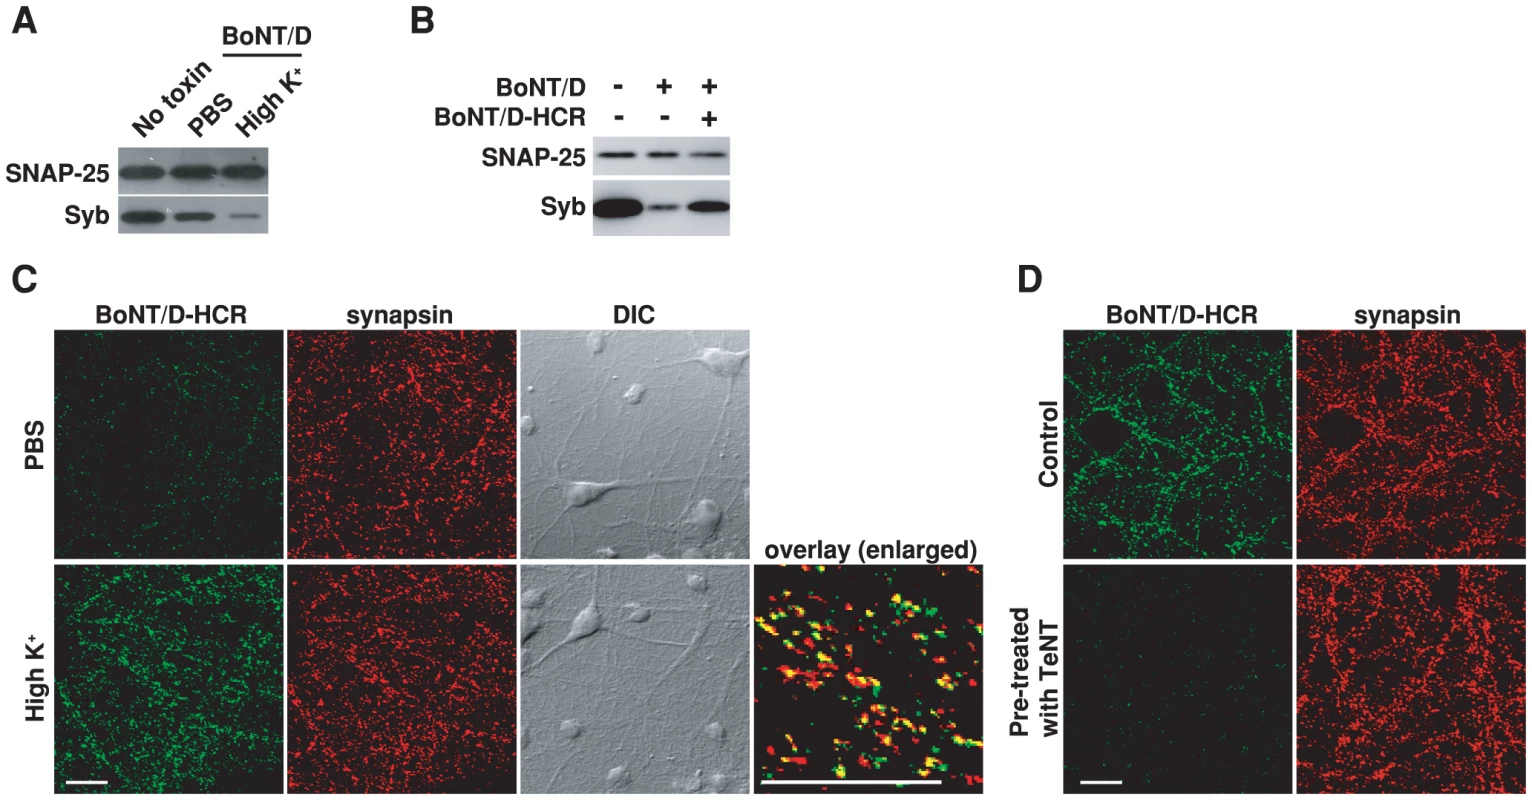 Stimulation of synaptic vesicle recycling increases the binding and entry of BoNT/D into neurons.